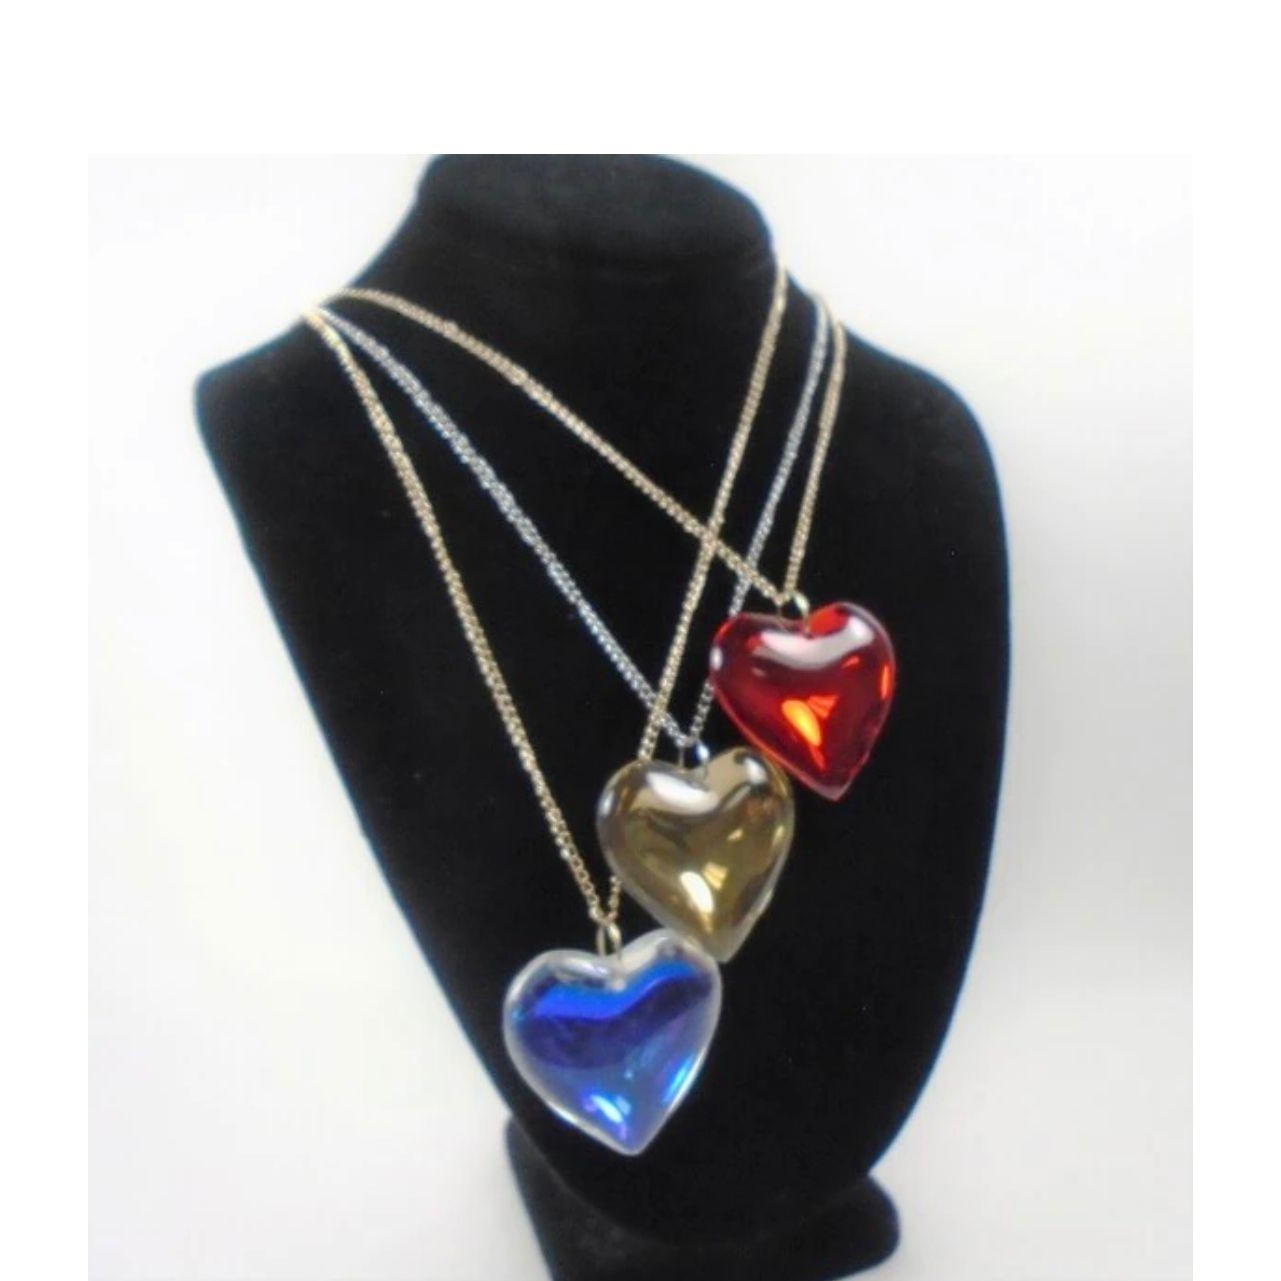 Gold & Silver Chain Necklace w/ 1.5" Glass Heart Pendant